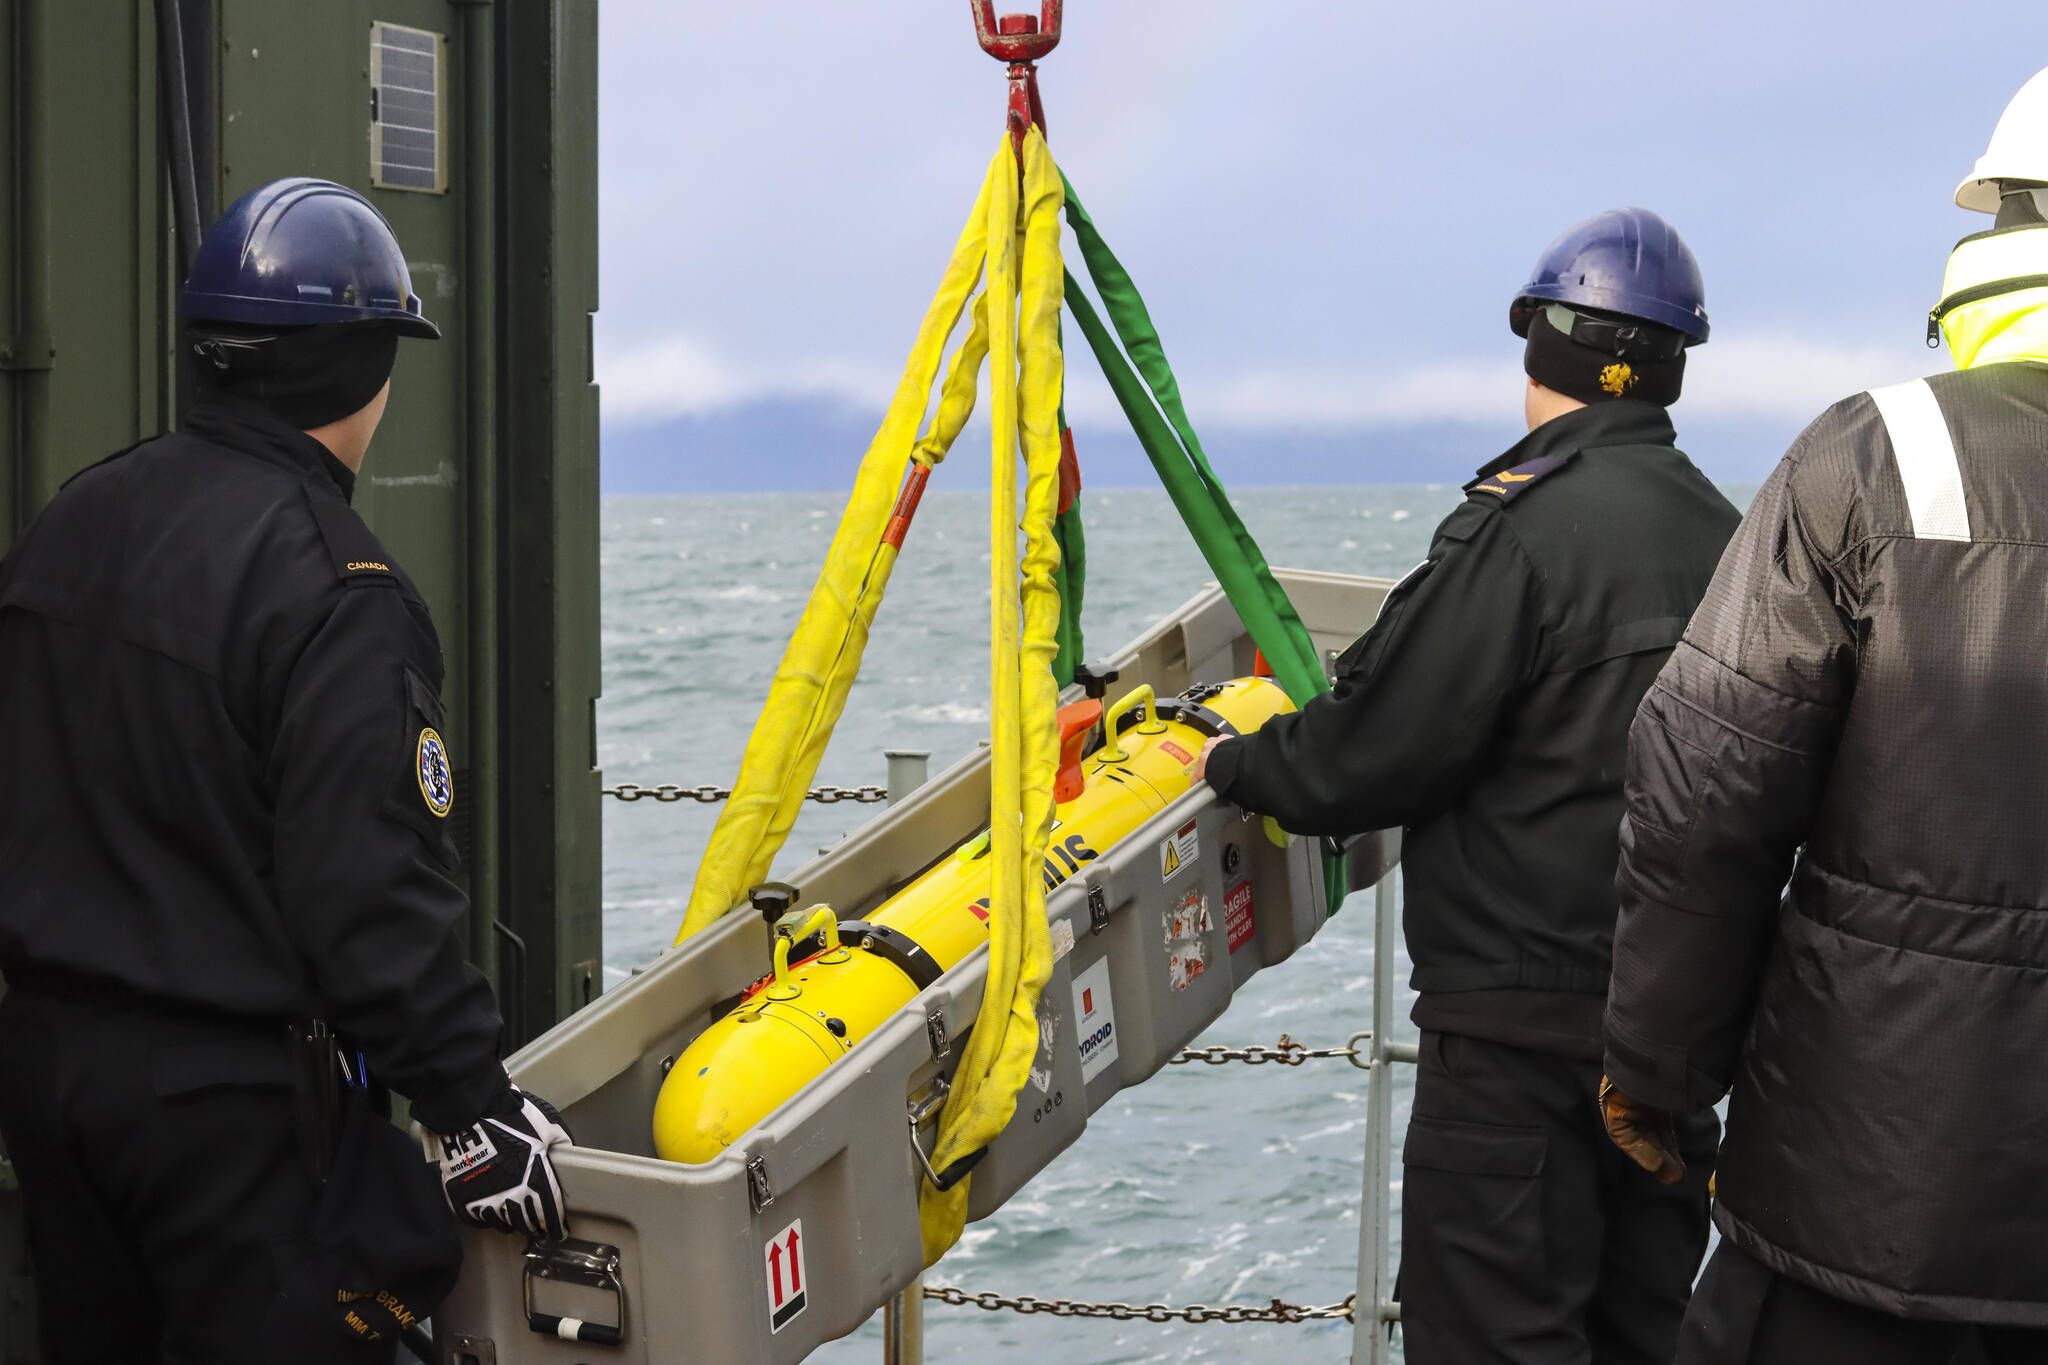 Royal Canadian Navy sailors load the remote environmental monitoring units unmanned underwater vehicle onto a small boat in Stephens Passage on March 6, 2022, as part of exercise Arctic Edge 2022. (Michael S. Lockett / Juneau Empire)